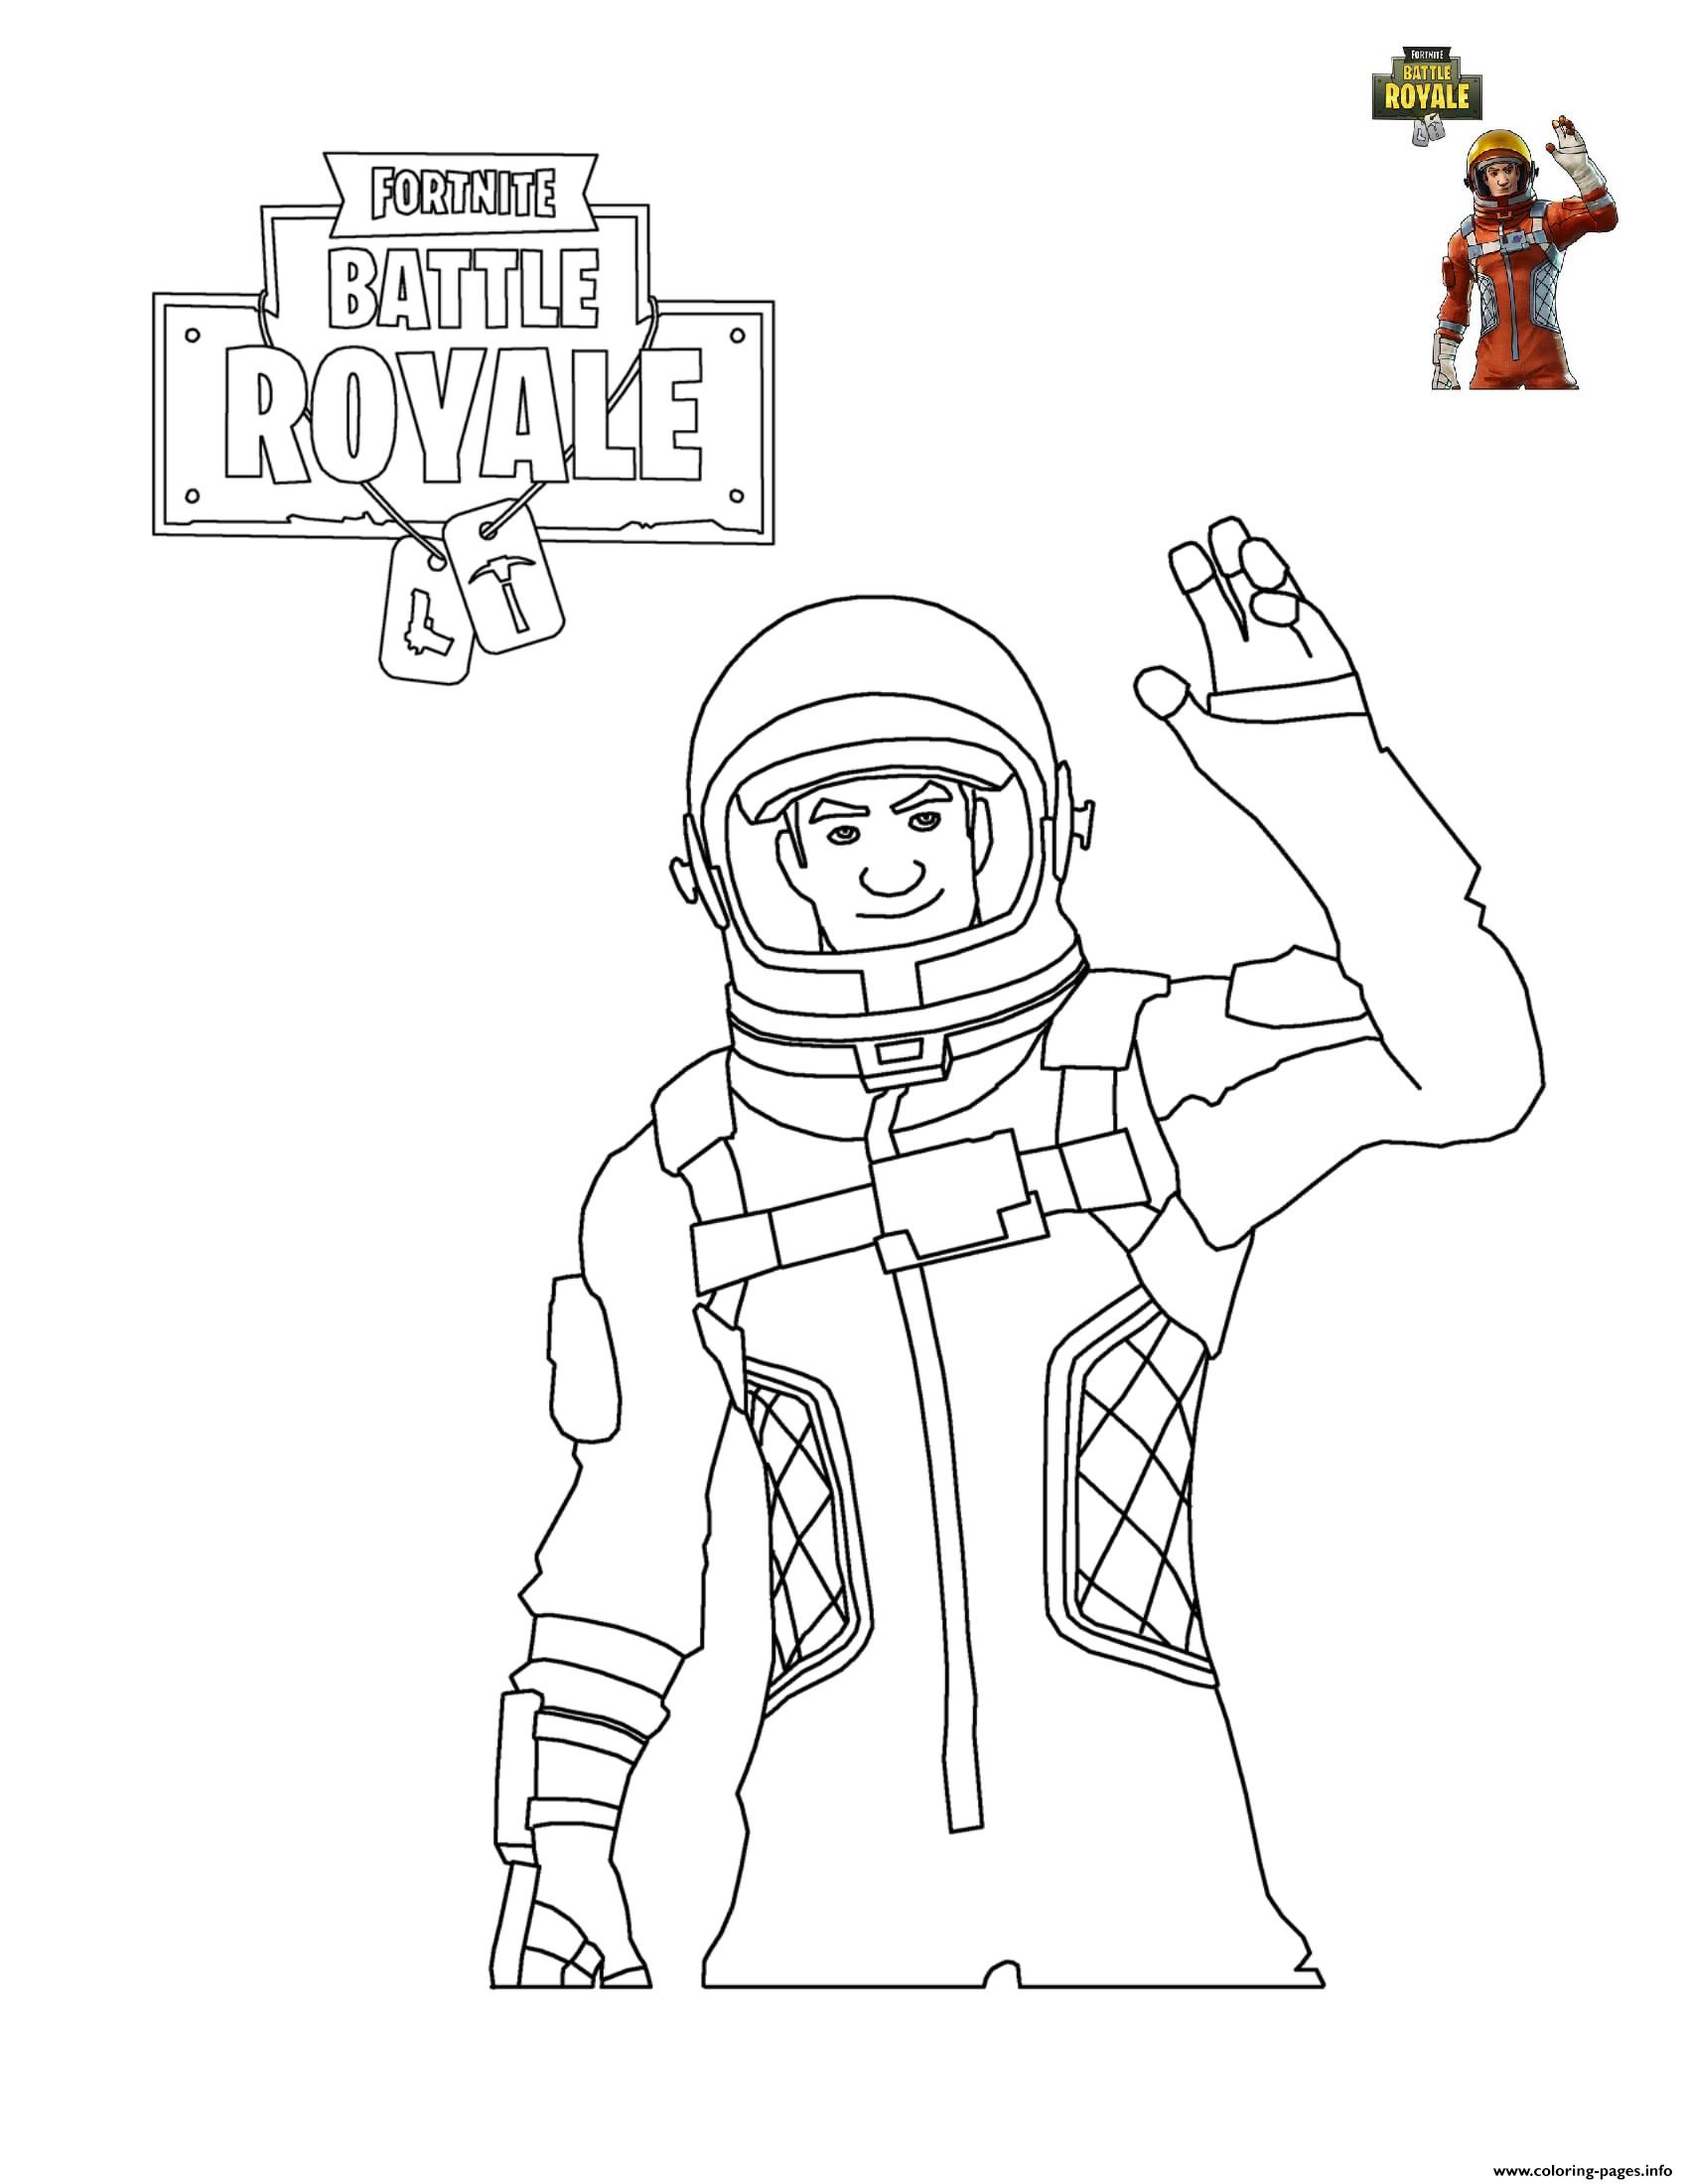 Fortnite Skins Coloring Pages To Print - 1700 x 2200 jpeg 192kB